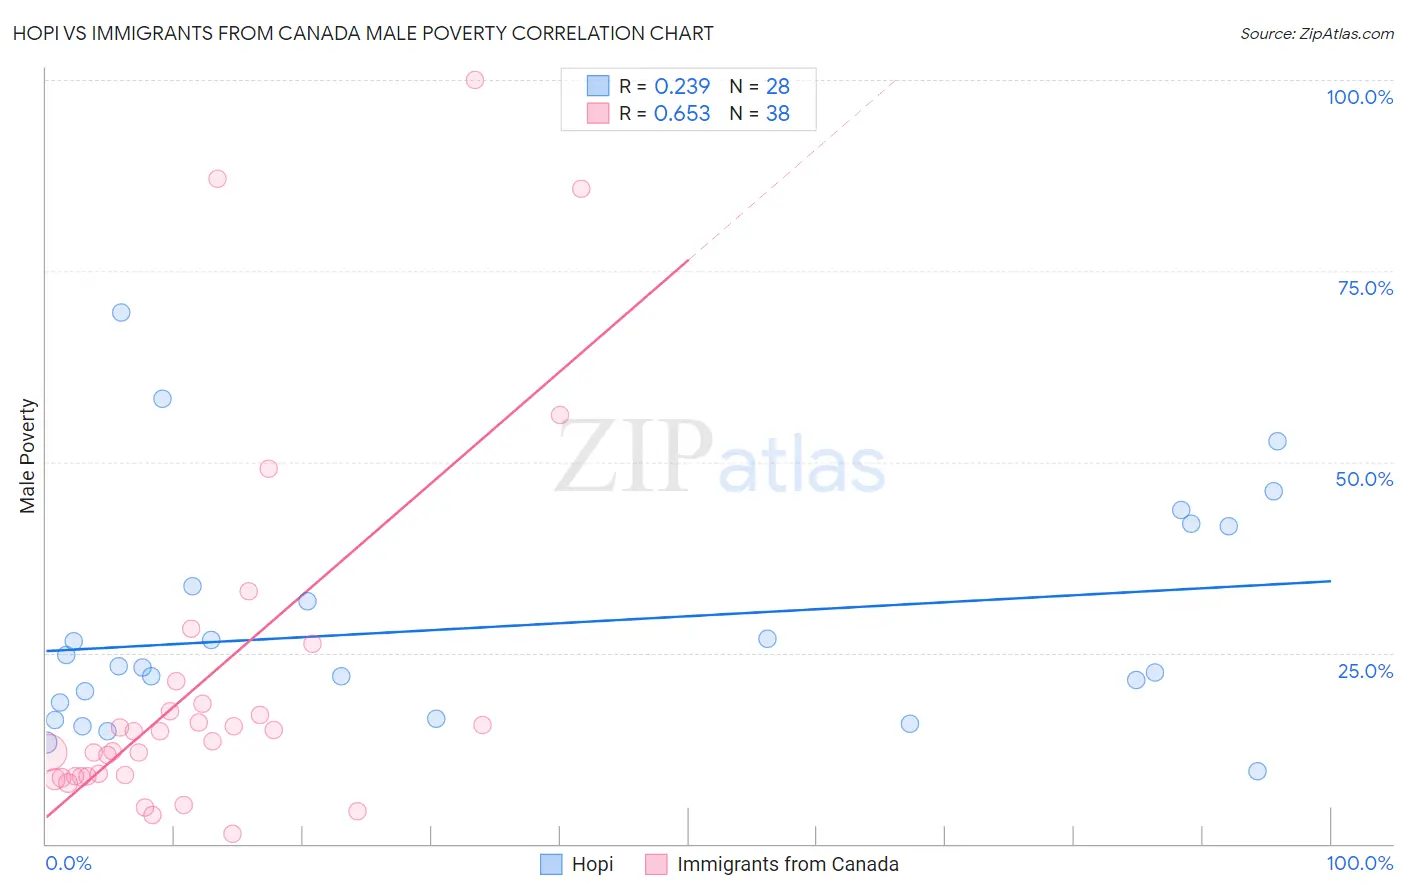 Hopi vs Immigrants from Canada Male Poverty